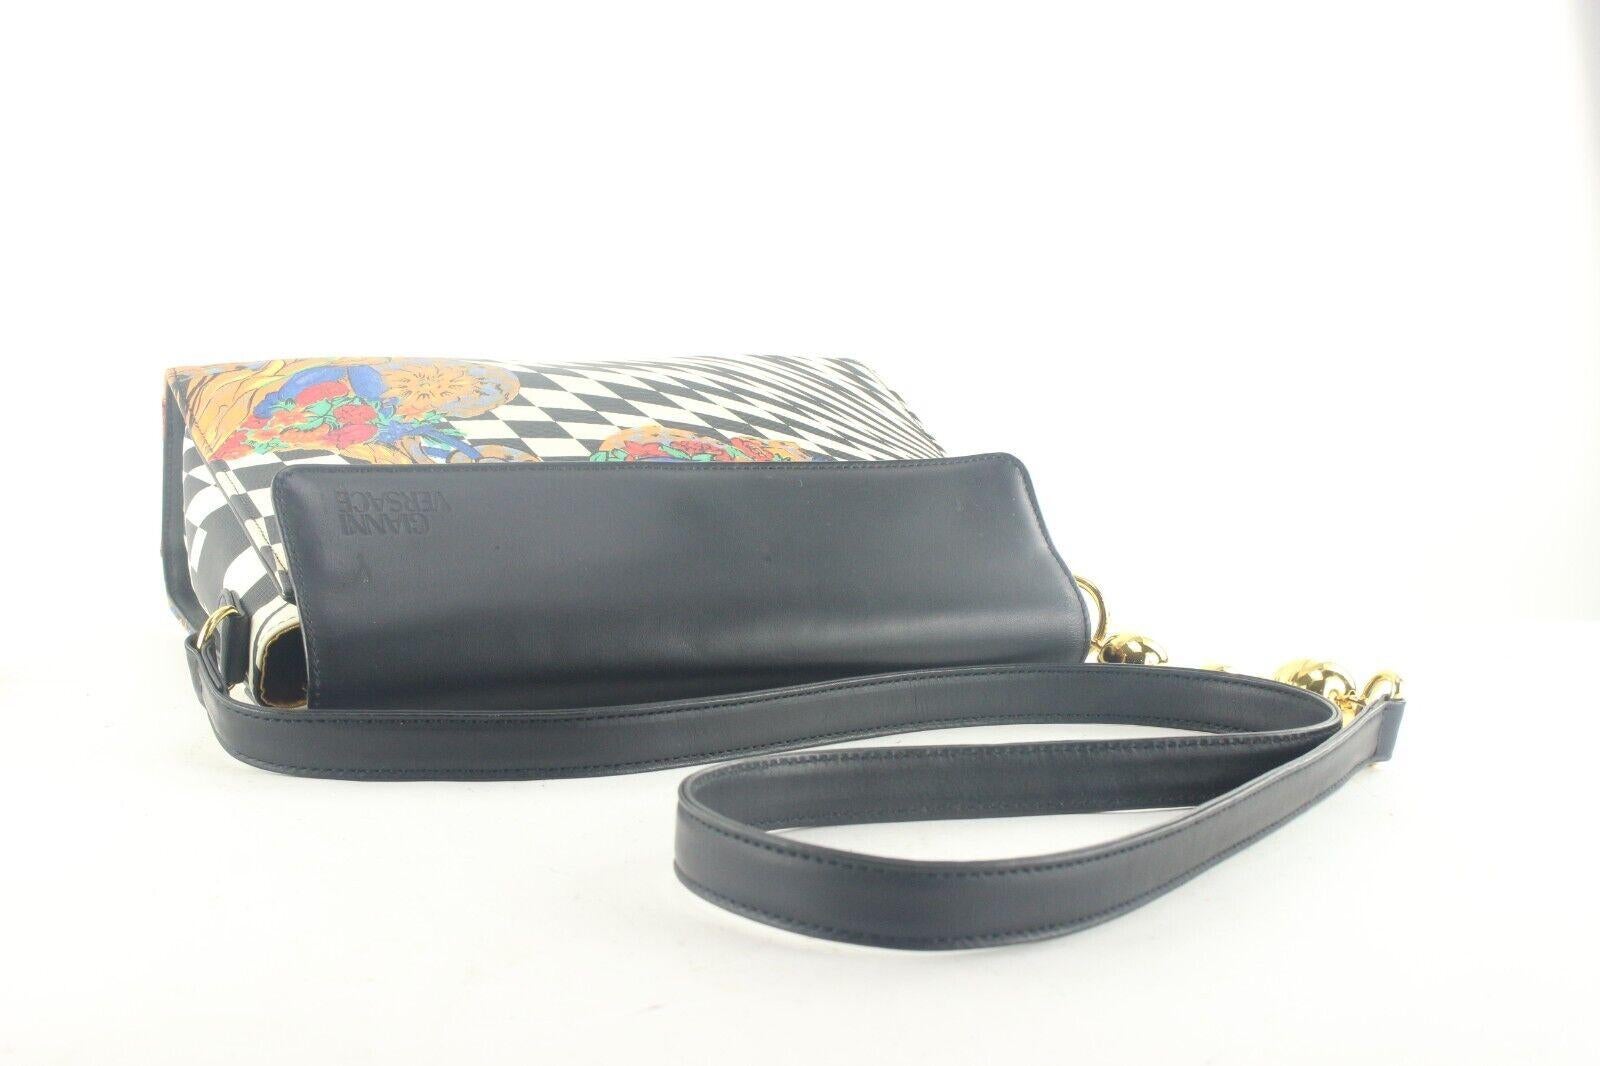 Gianni Versace Rare Psychedelic Illusion Crossbody 1GV912K For Sale 5